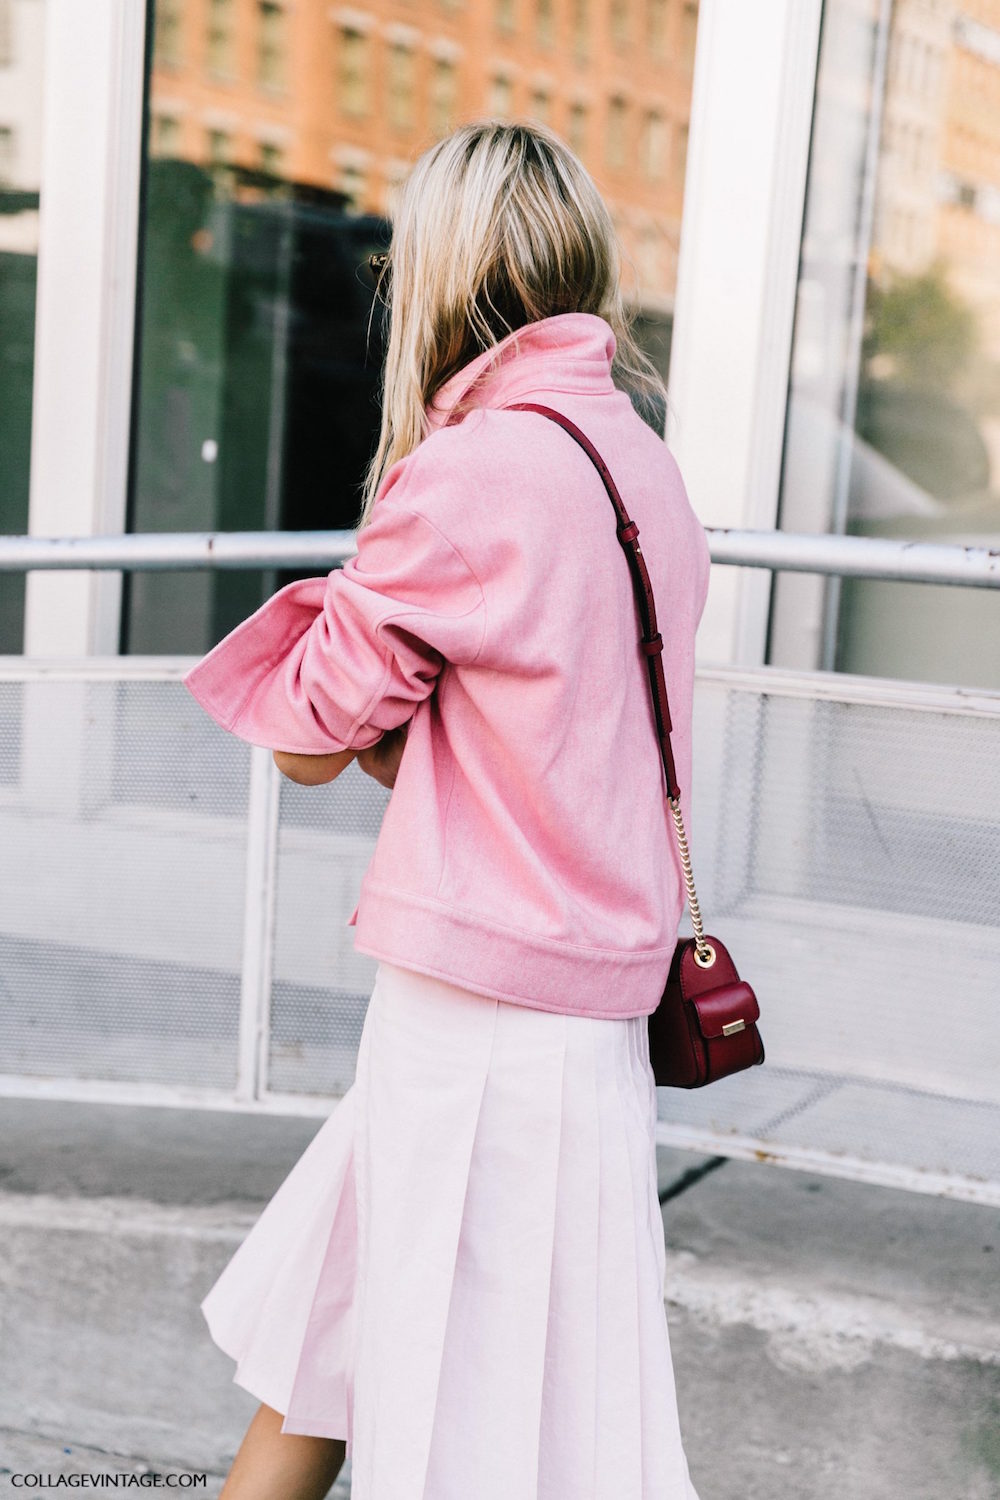 PINK-TREND-DALLE-PASSERELLE-ALLO-STREET-STYLE-SS17-Street_Style-Outfits-Collage_Vintage-Vintage-Del_Pozo-Michael_Kors-Hugo_Boss-67-1600x2400